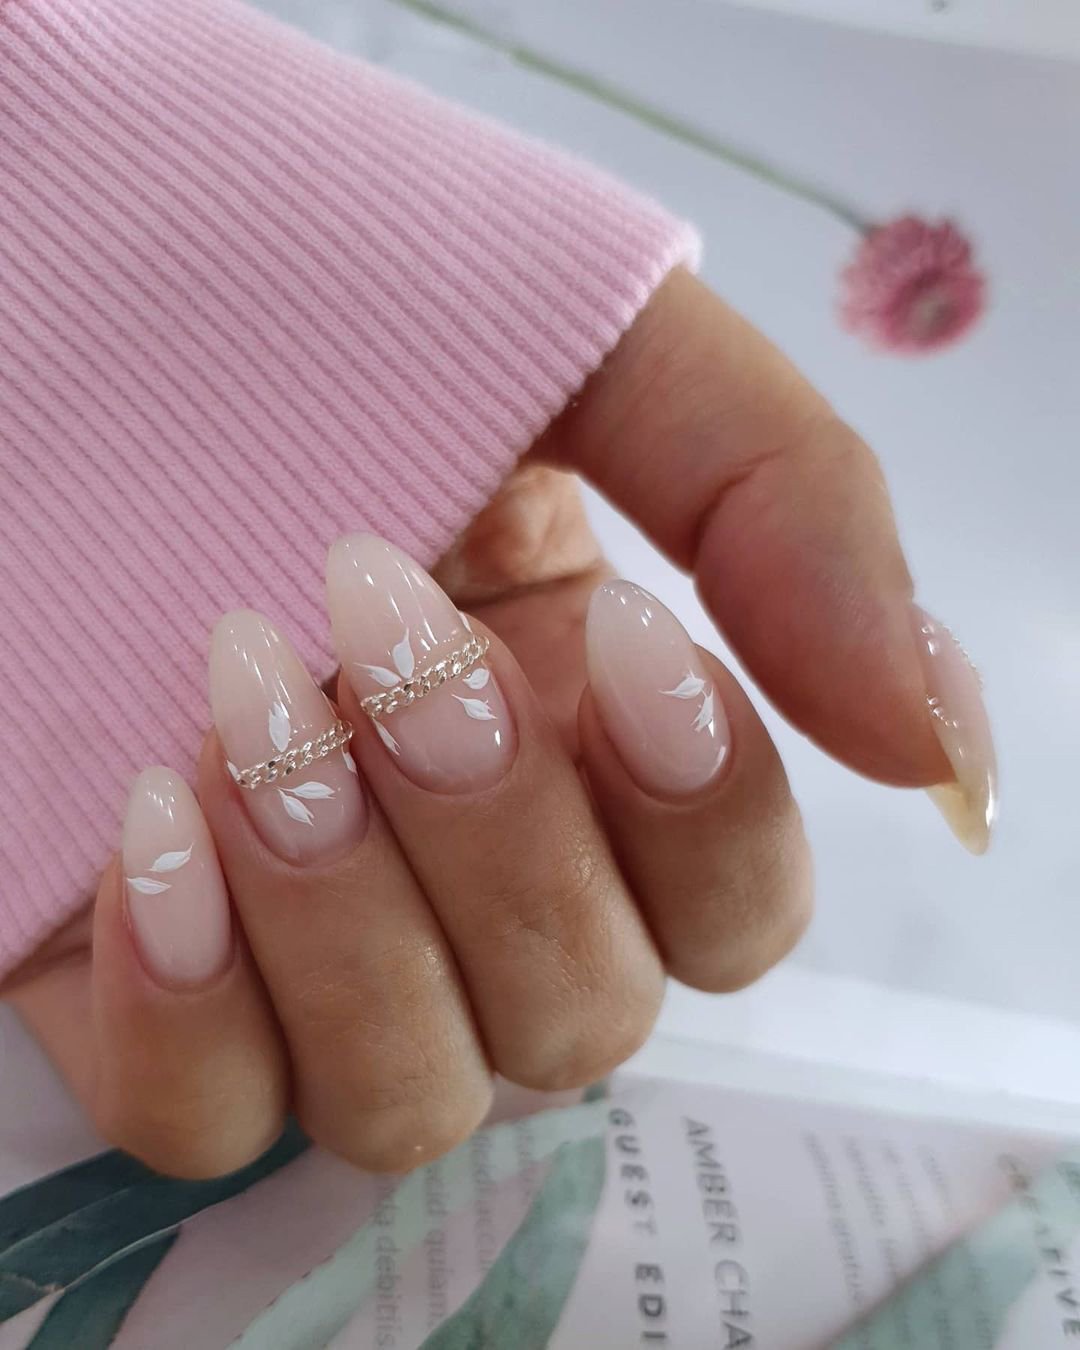 pink and white nails wedding gentle with flower petals kangannynails